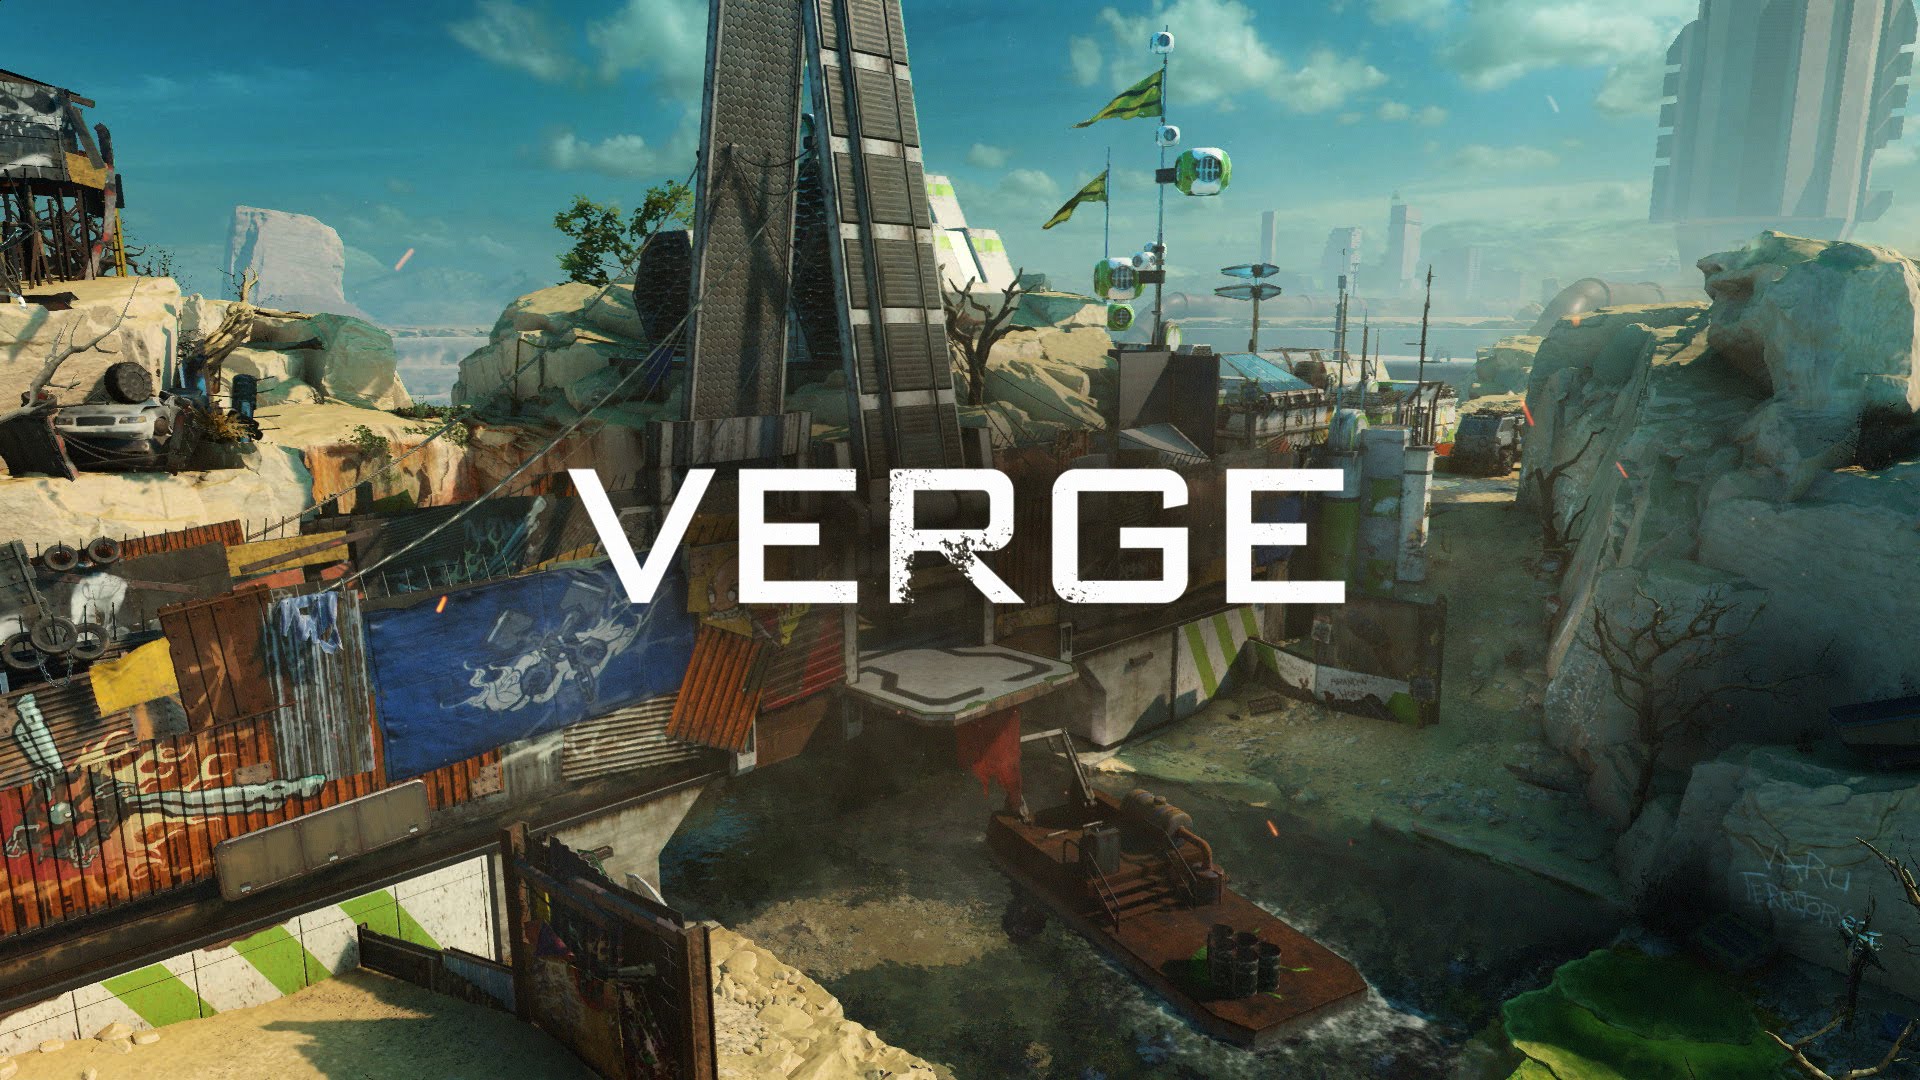 Call of Duty®: Black Ops III – Eclipse DLC Pack: Verge Preview